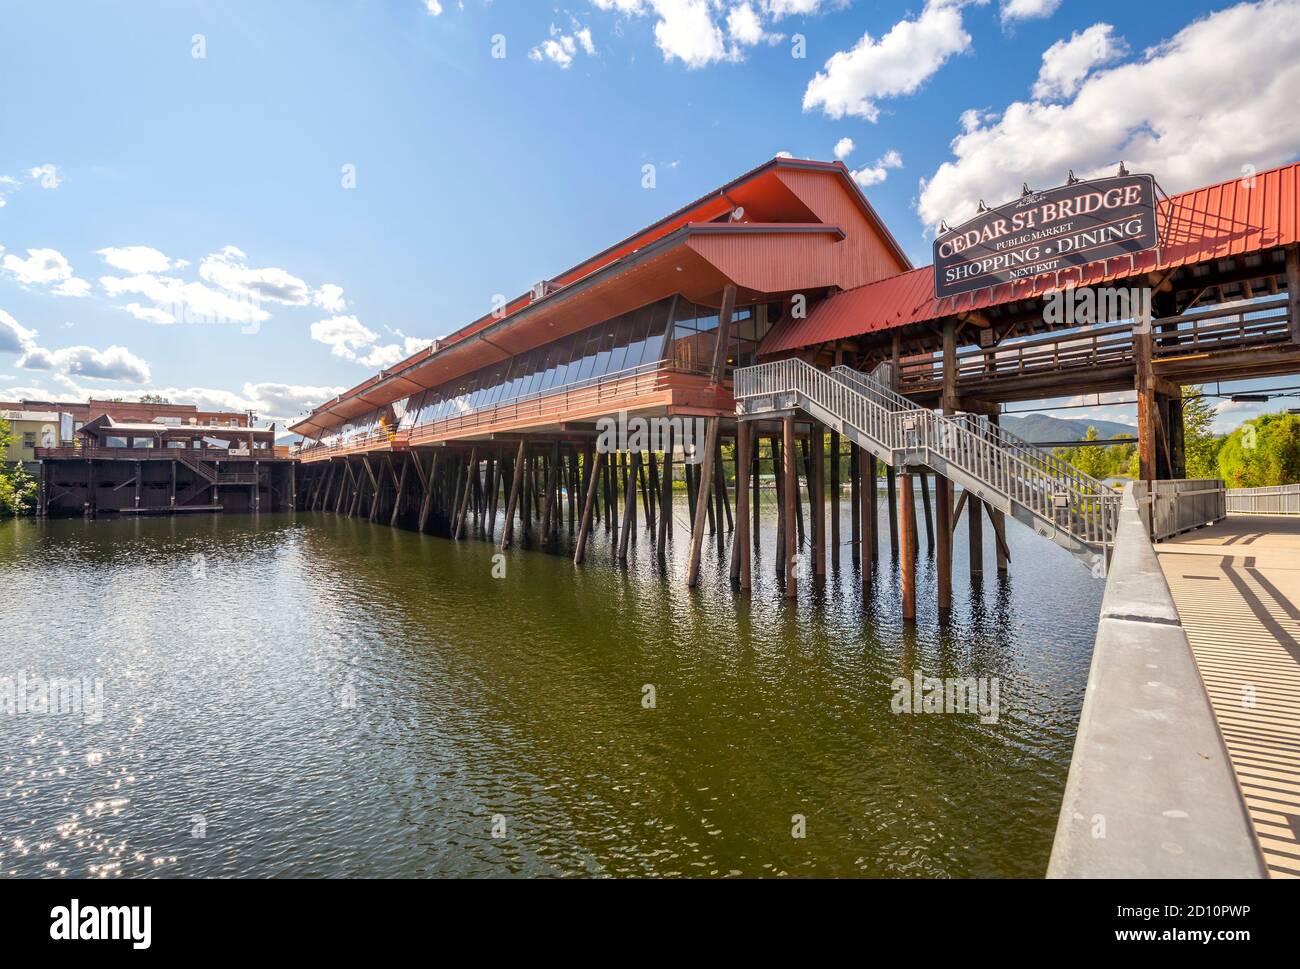 The Cedar Street Bridge Public Market of shopping and dining along Sand Creek River and Lake Pend Oreille in Sandpoint, Idaho, USA during summer. Stock Photo